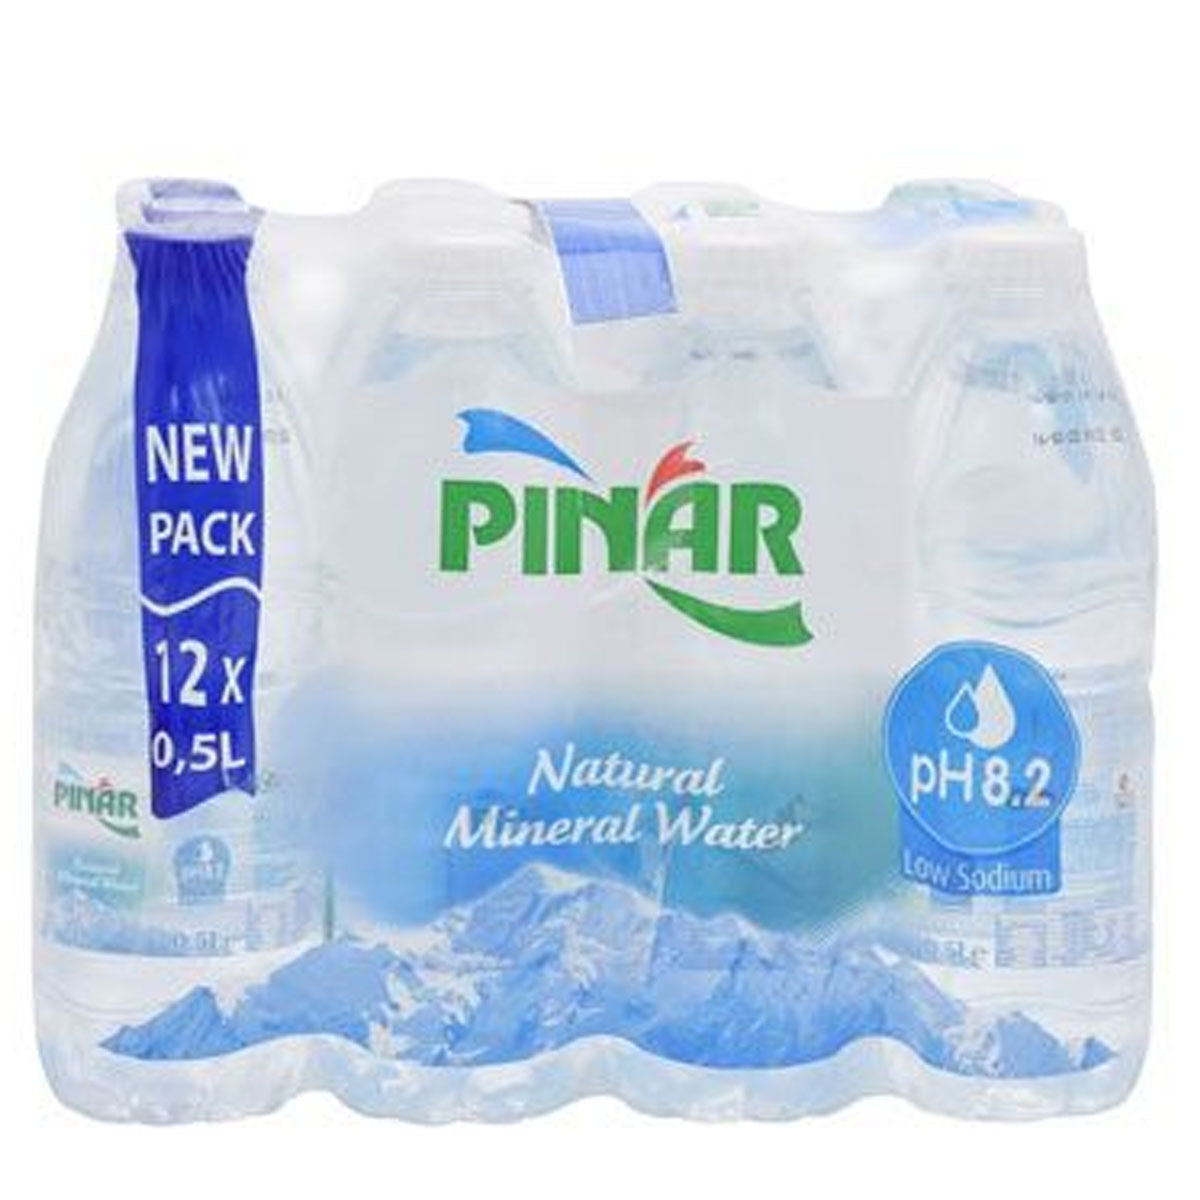 Pinar - Mineral Water - 12x500ml - 4 pack.